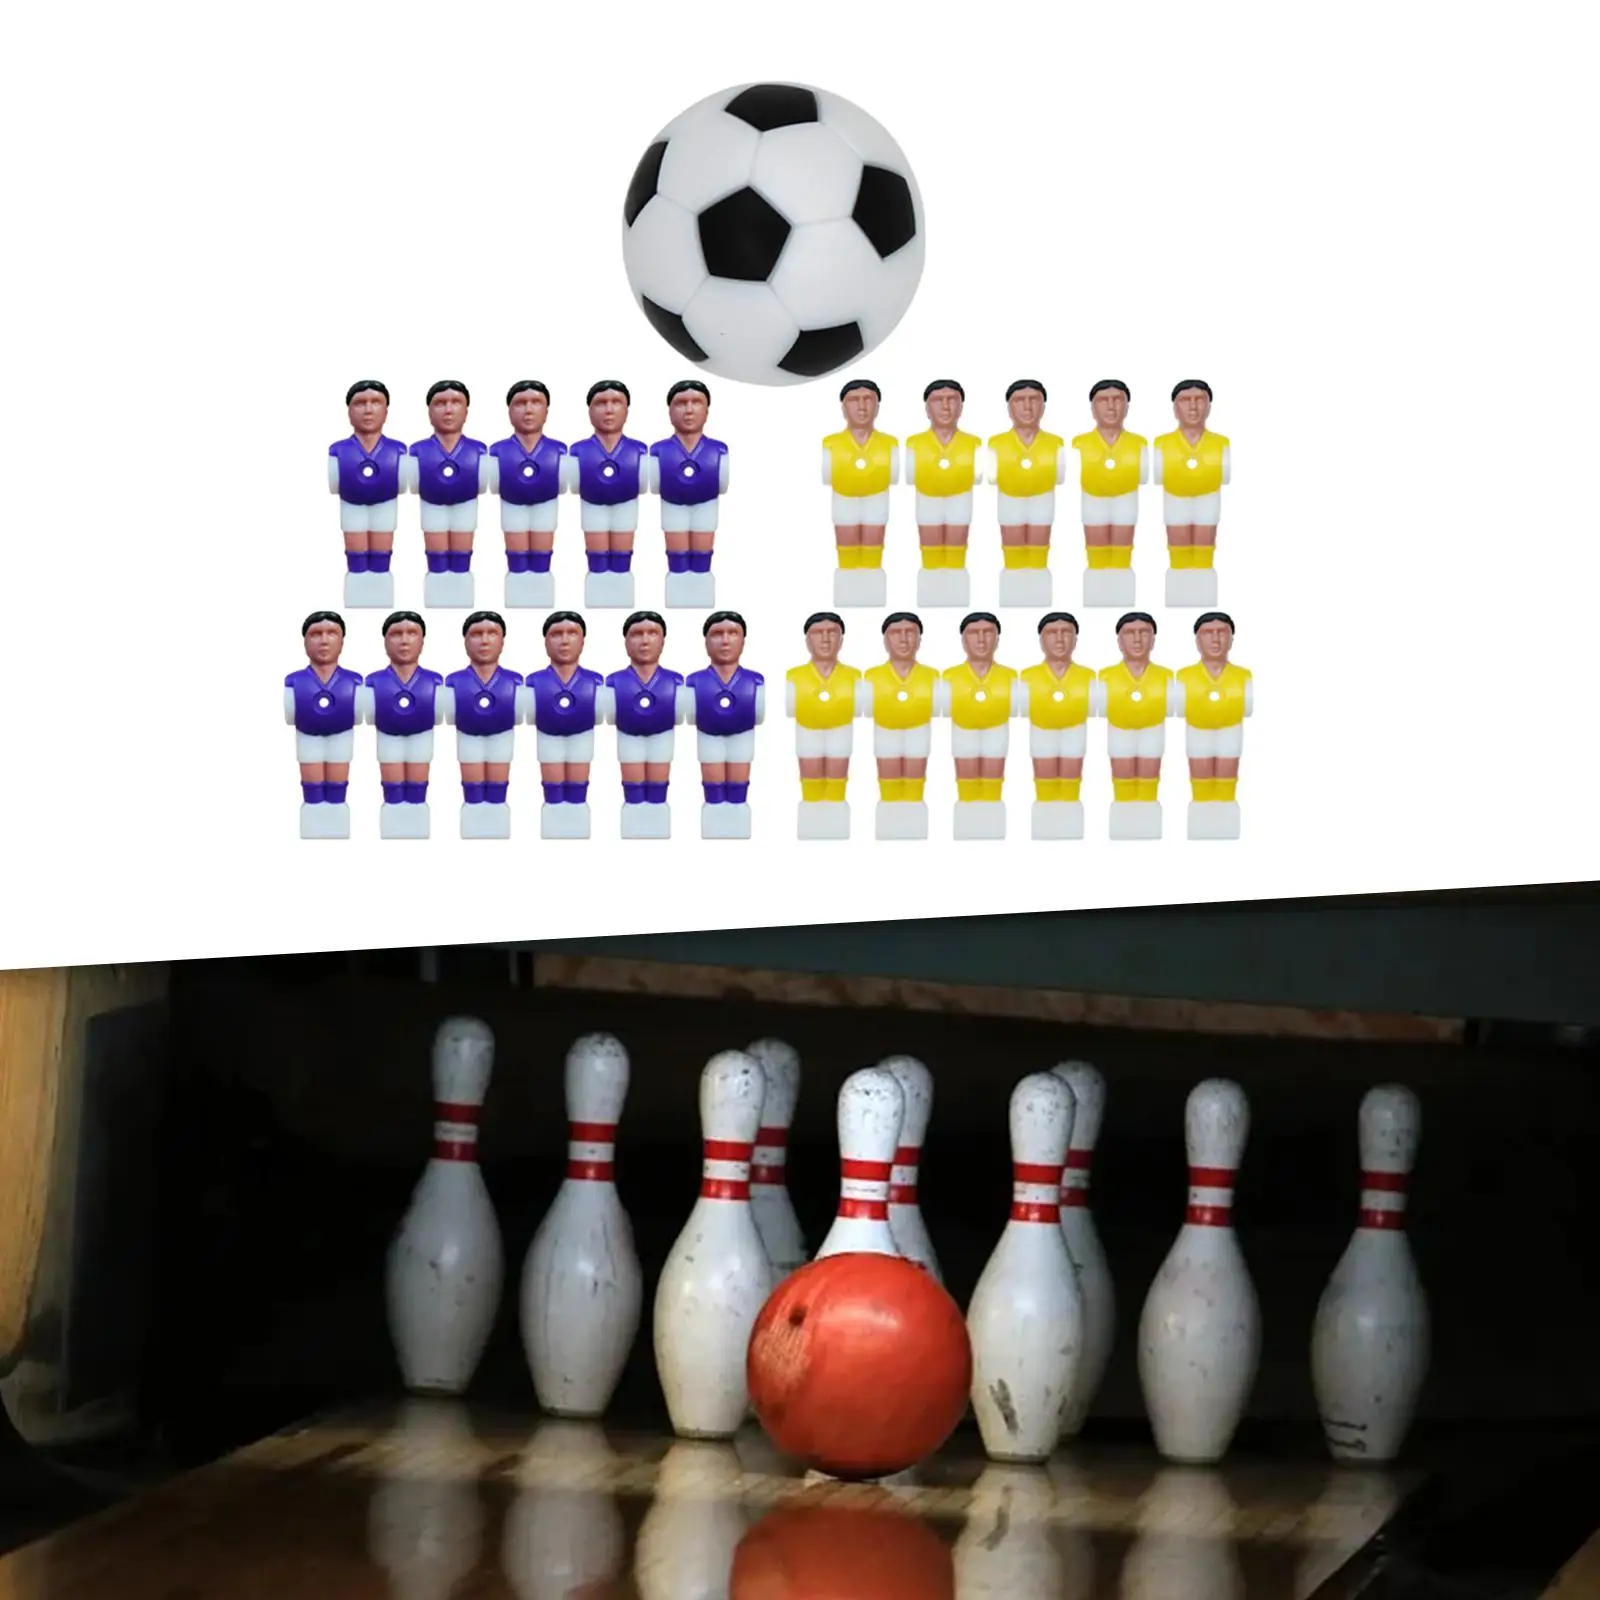 Foosball Men Replacement Football Players Figures Table Football Men Football Machine Accessories Soccer Table Player